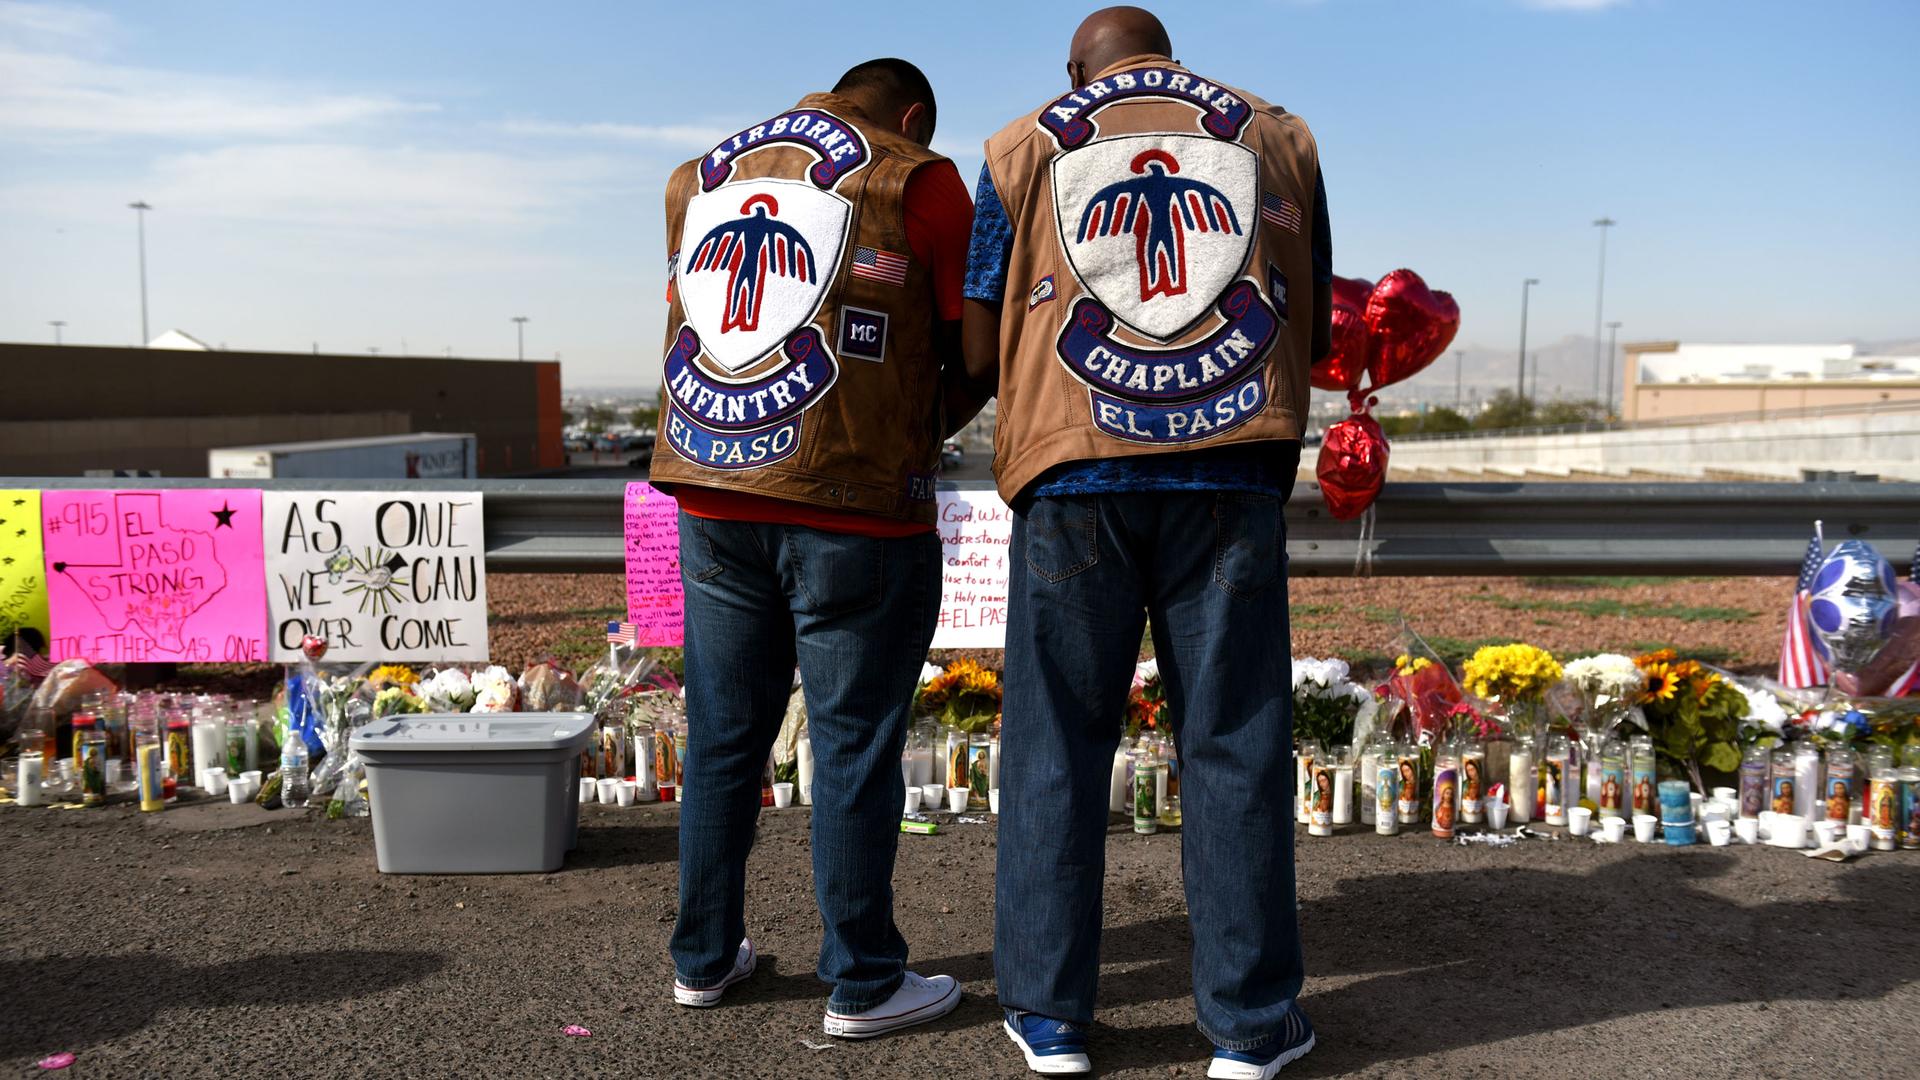 Two men bow their heads as they stand in front of an impromptu memorial for El Paso shooting victims